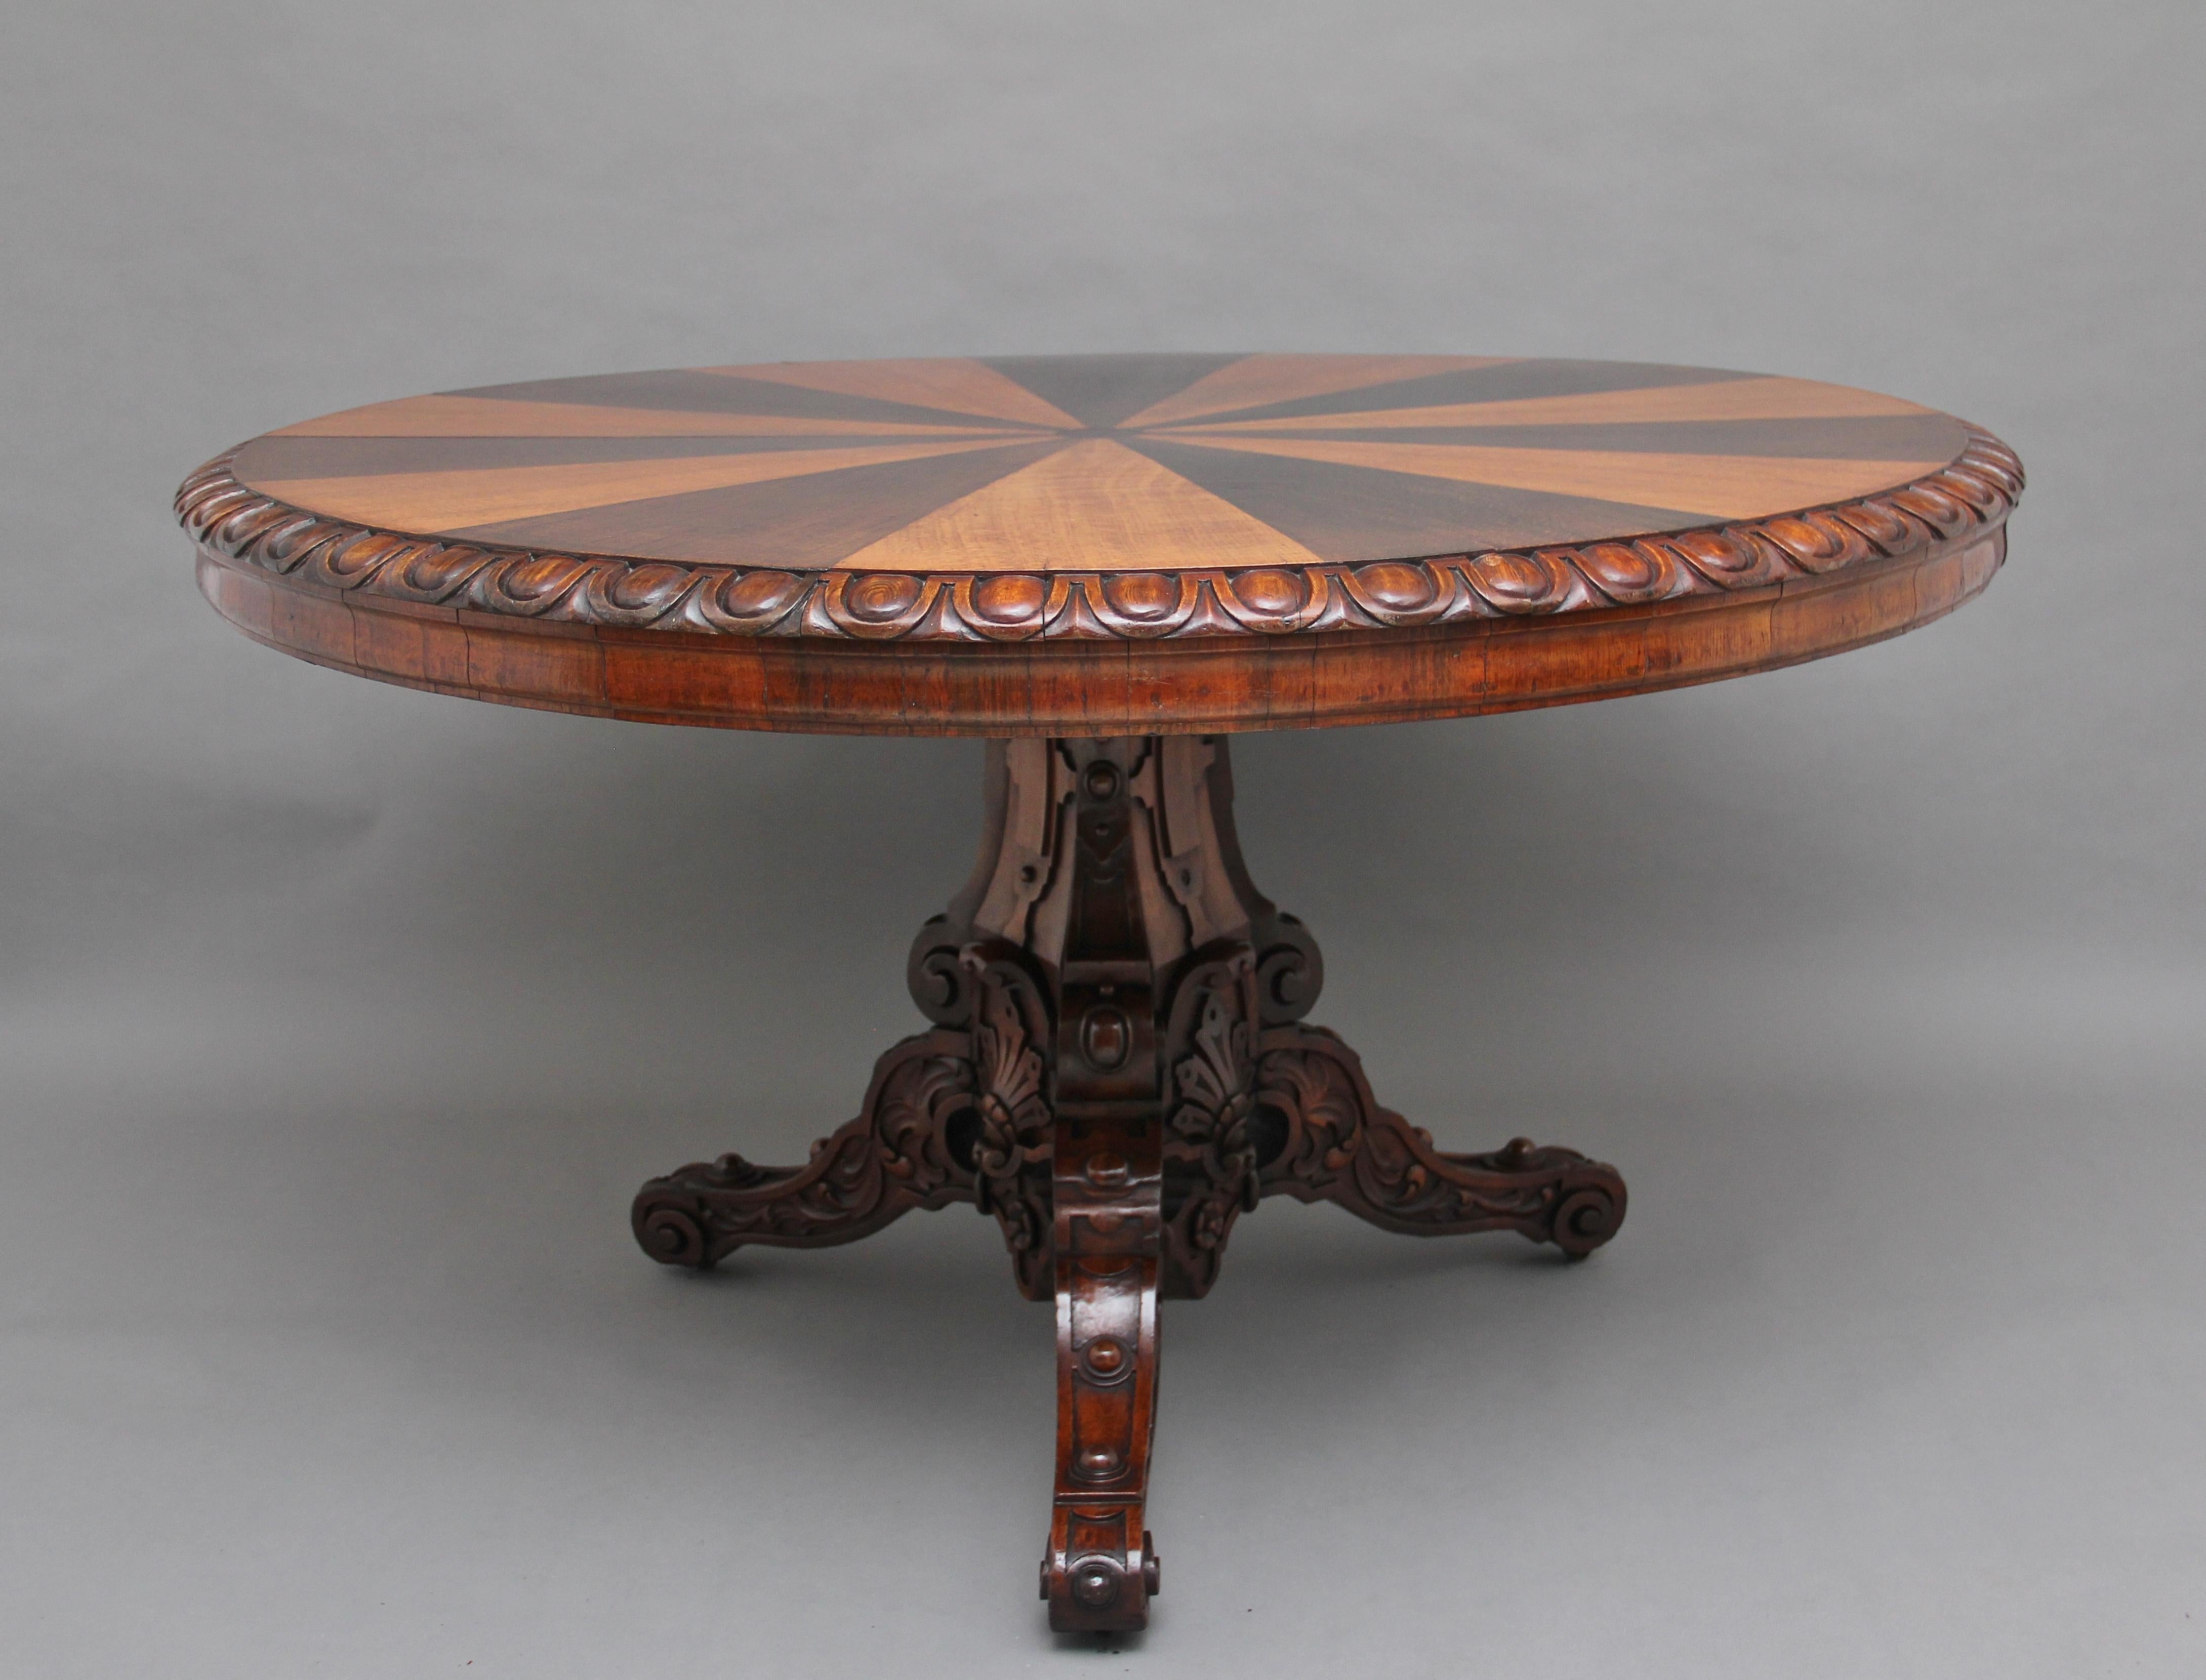 A lovely quality mid-19th Century oak breakfast / centre table having a decorative segmented top with a gadrooned edge supported on a heavily carved tri form column terminating on three shaped and carved legs with scroll feet, circa 1860.